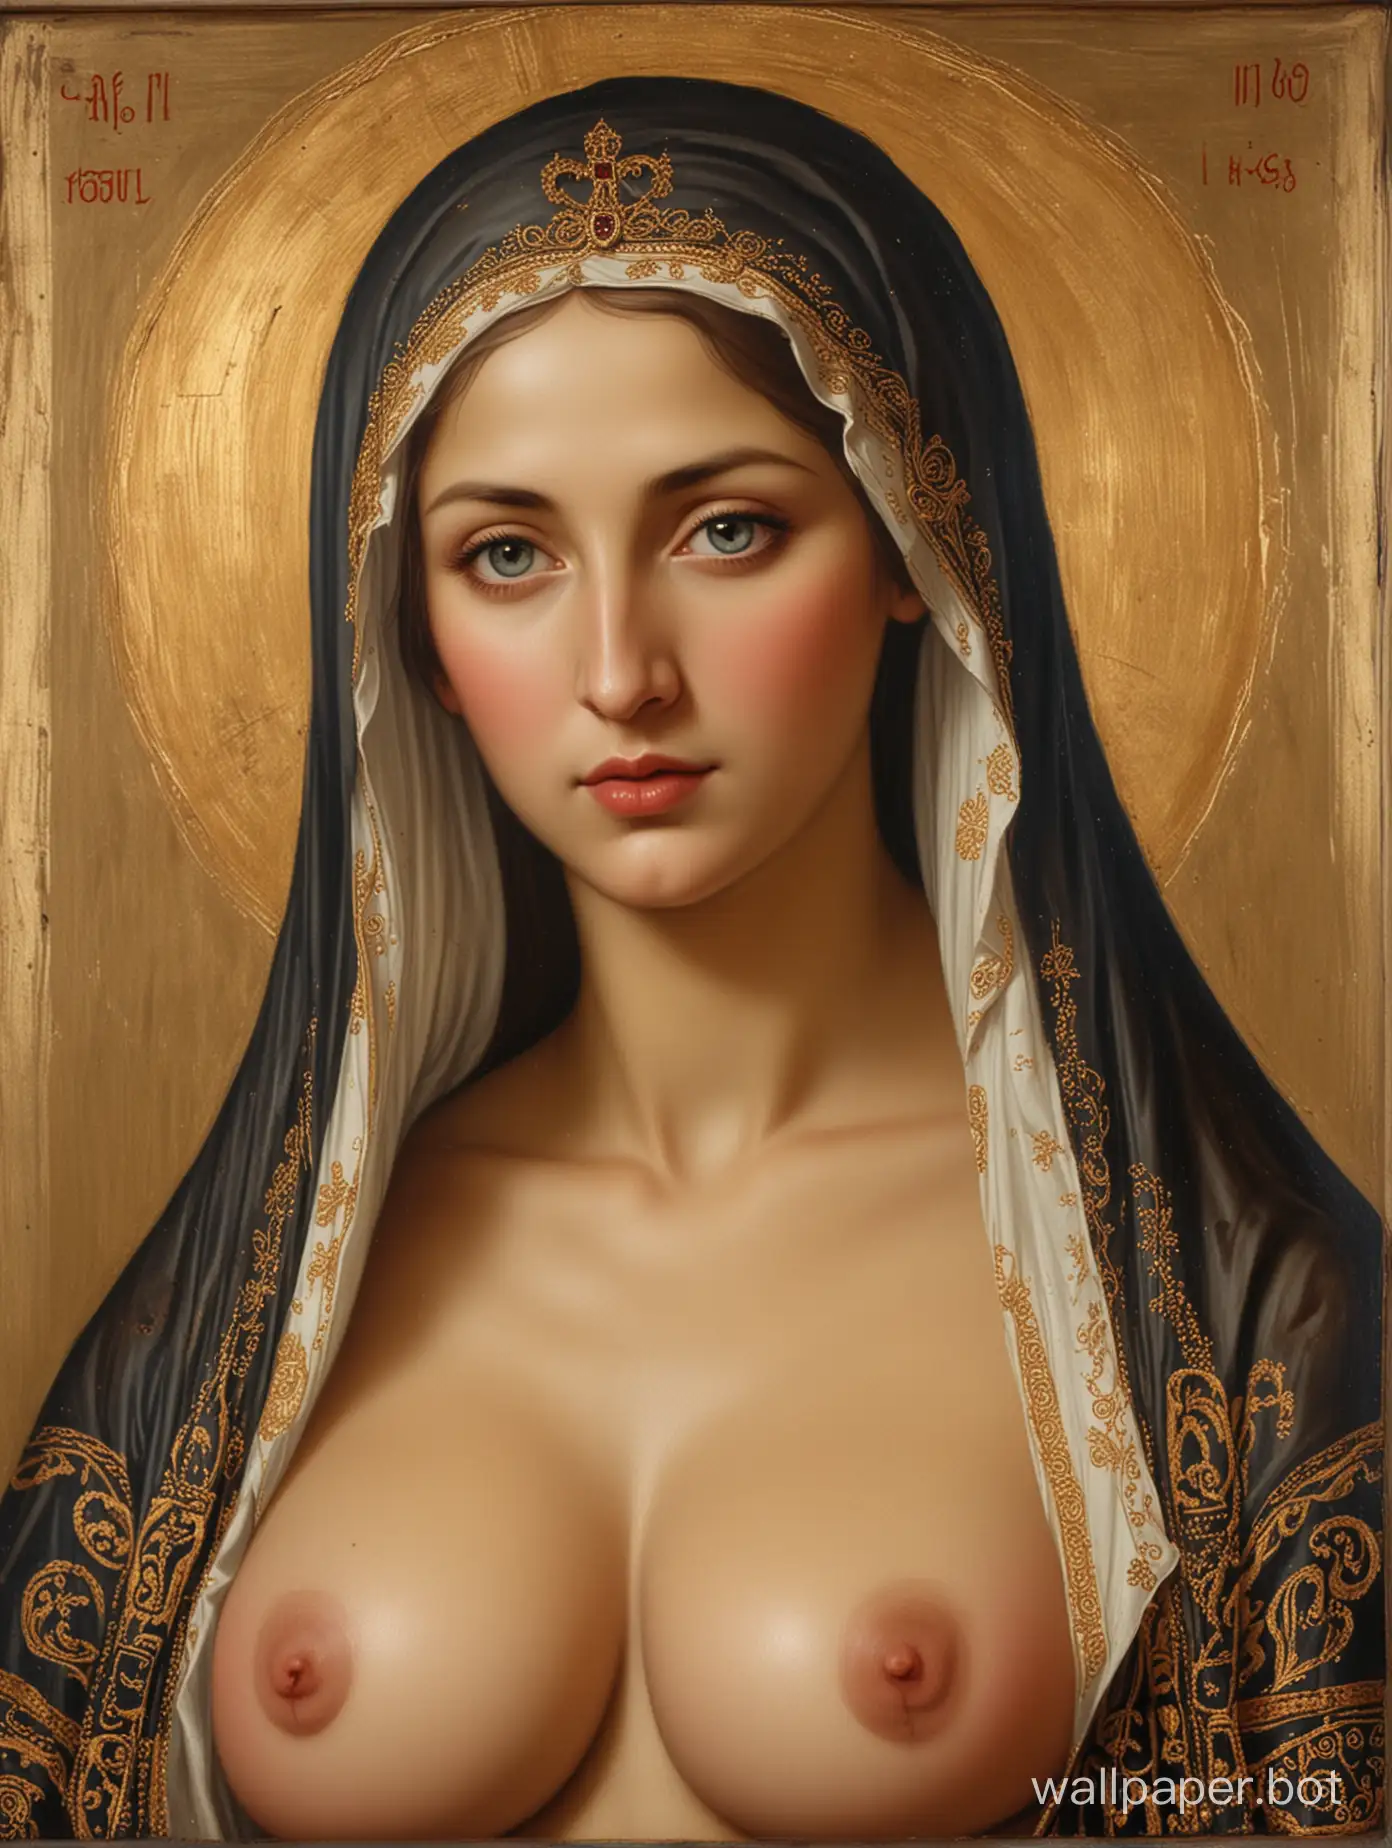 Orthodox-Icon-Portrait-of-Our-Lady-of-Kazan-with-Revealing-Attire